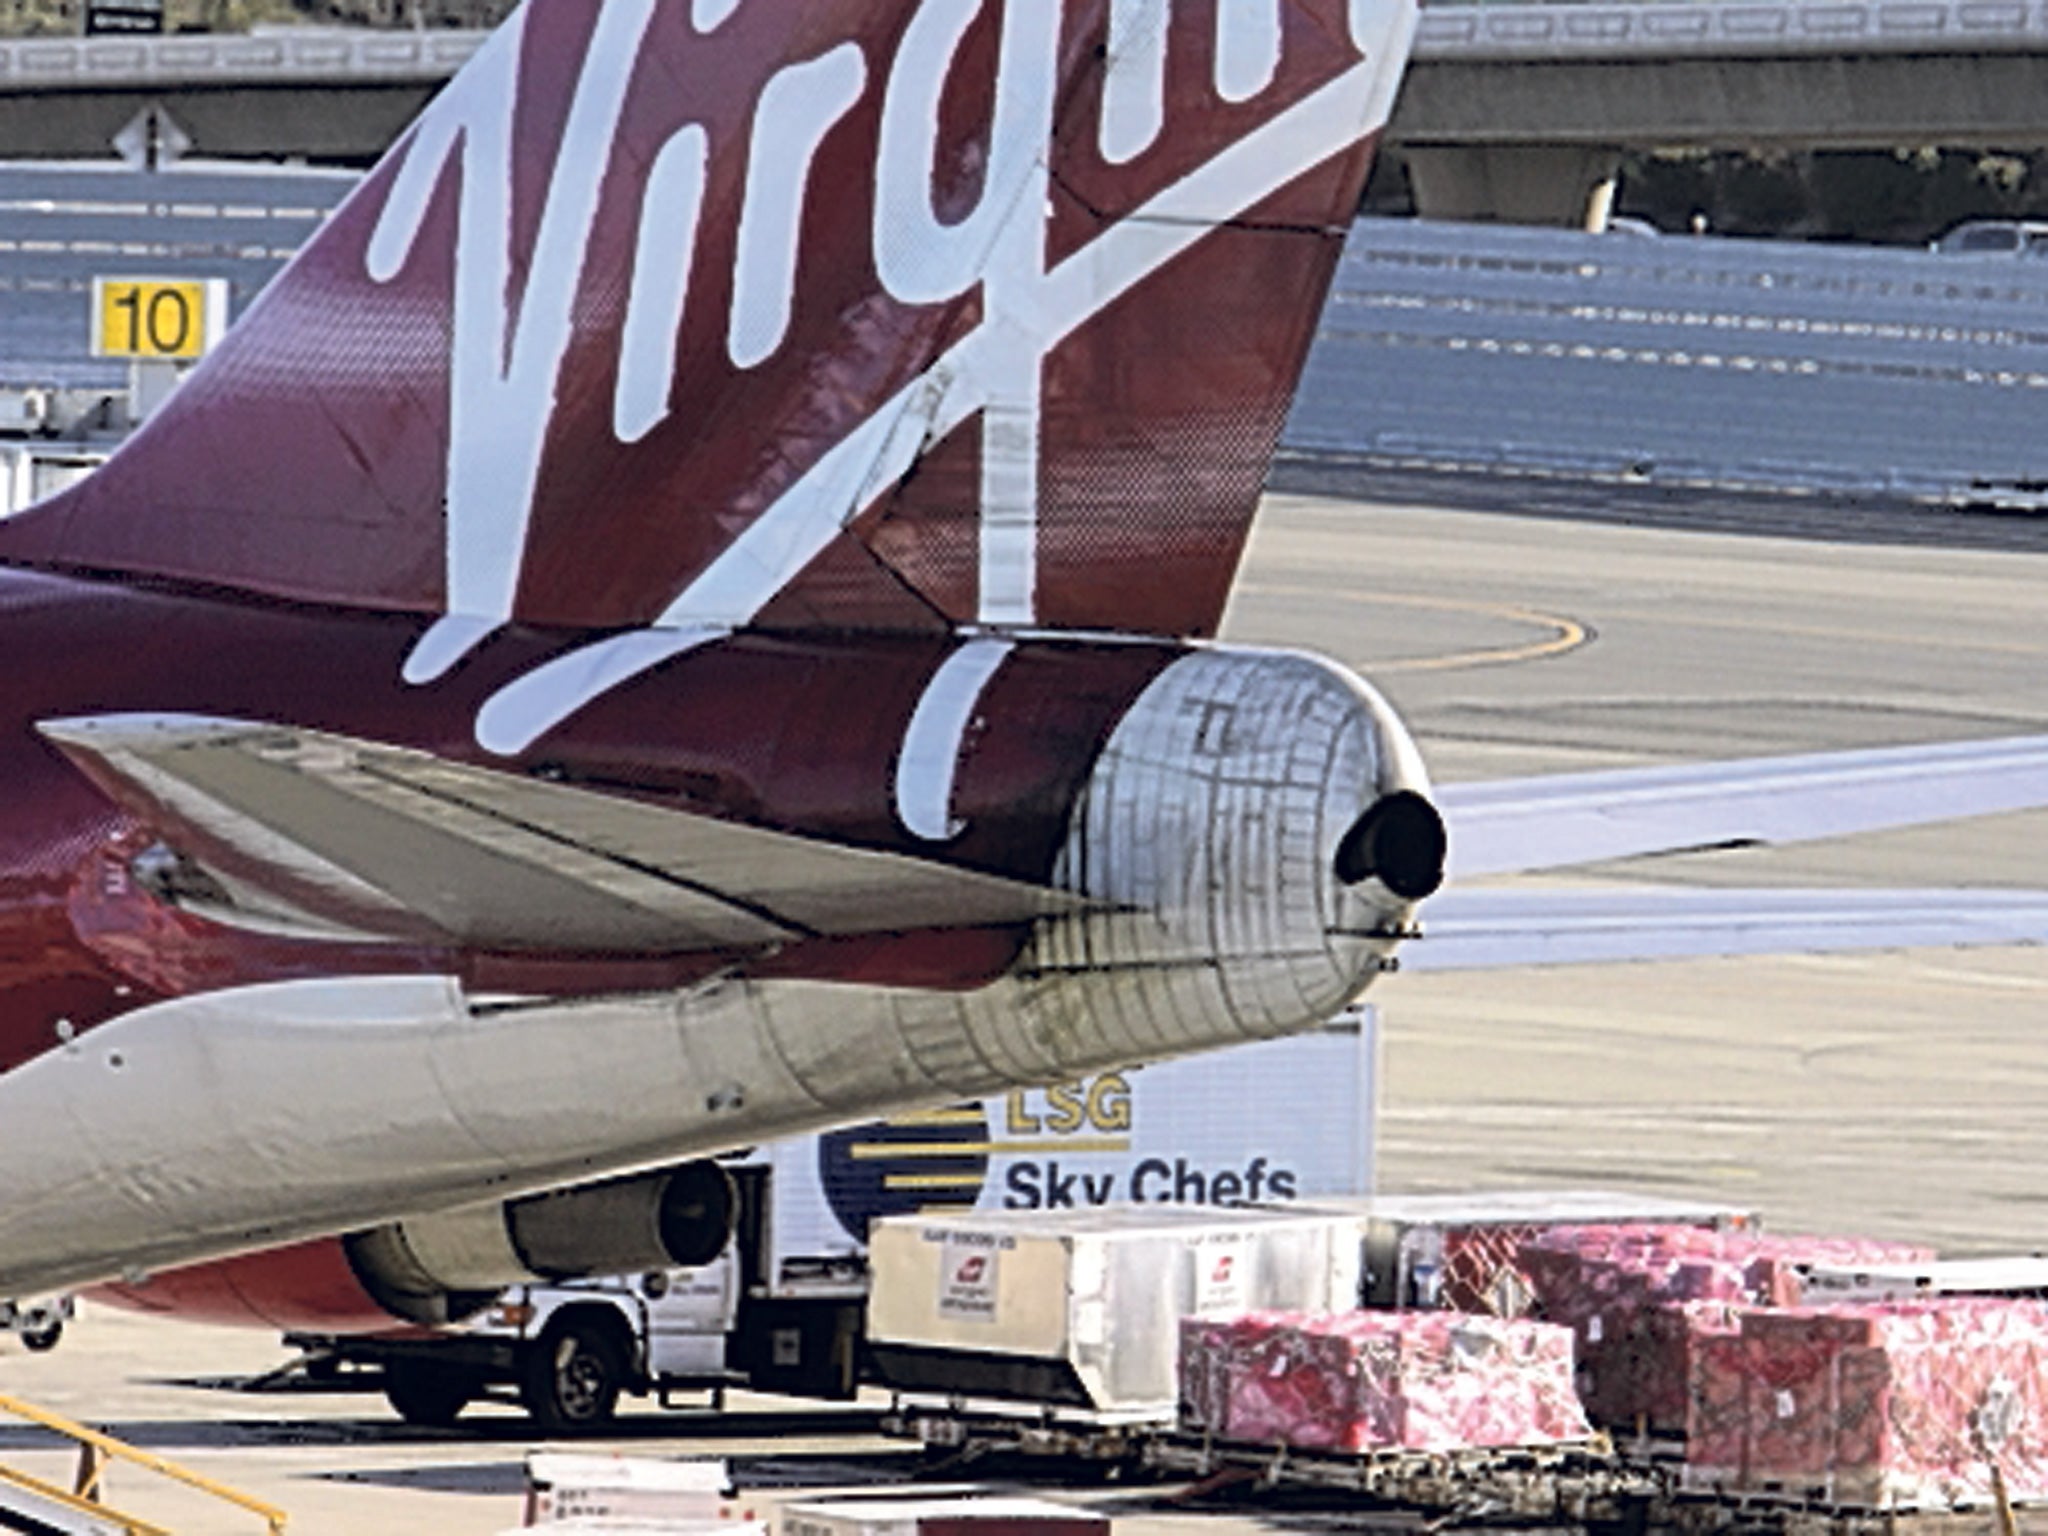 Hot stuff: Virgin led the way for non-smokers